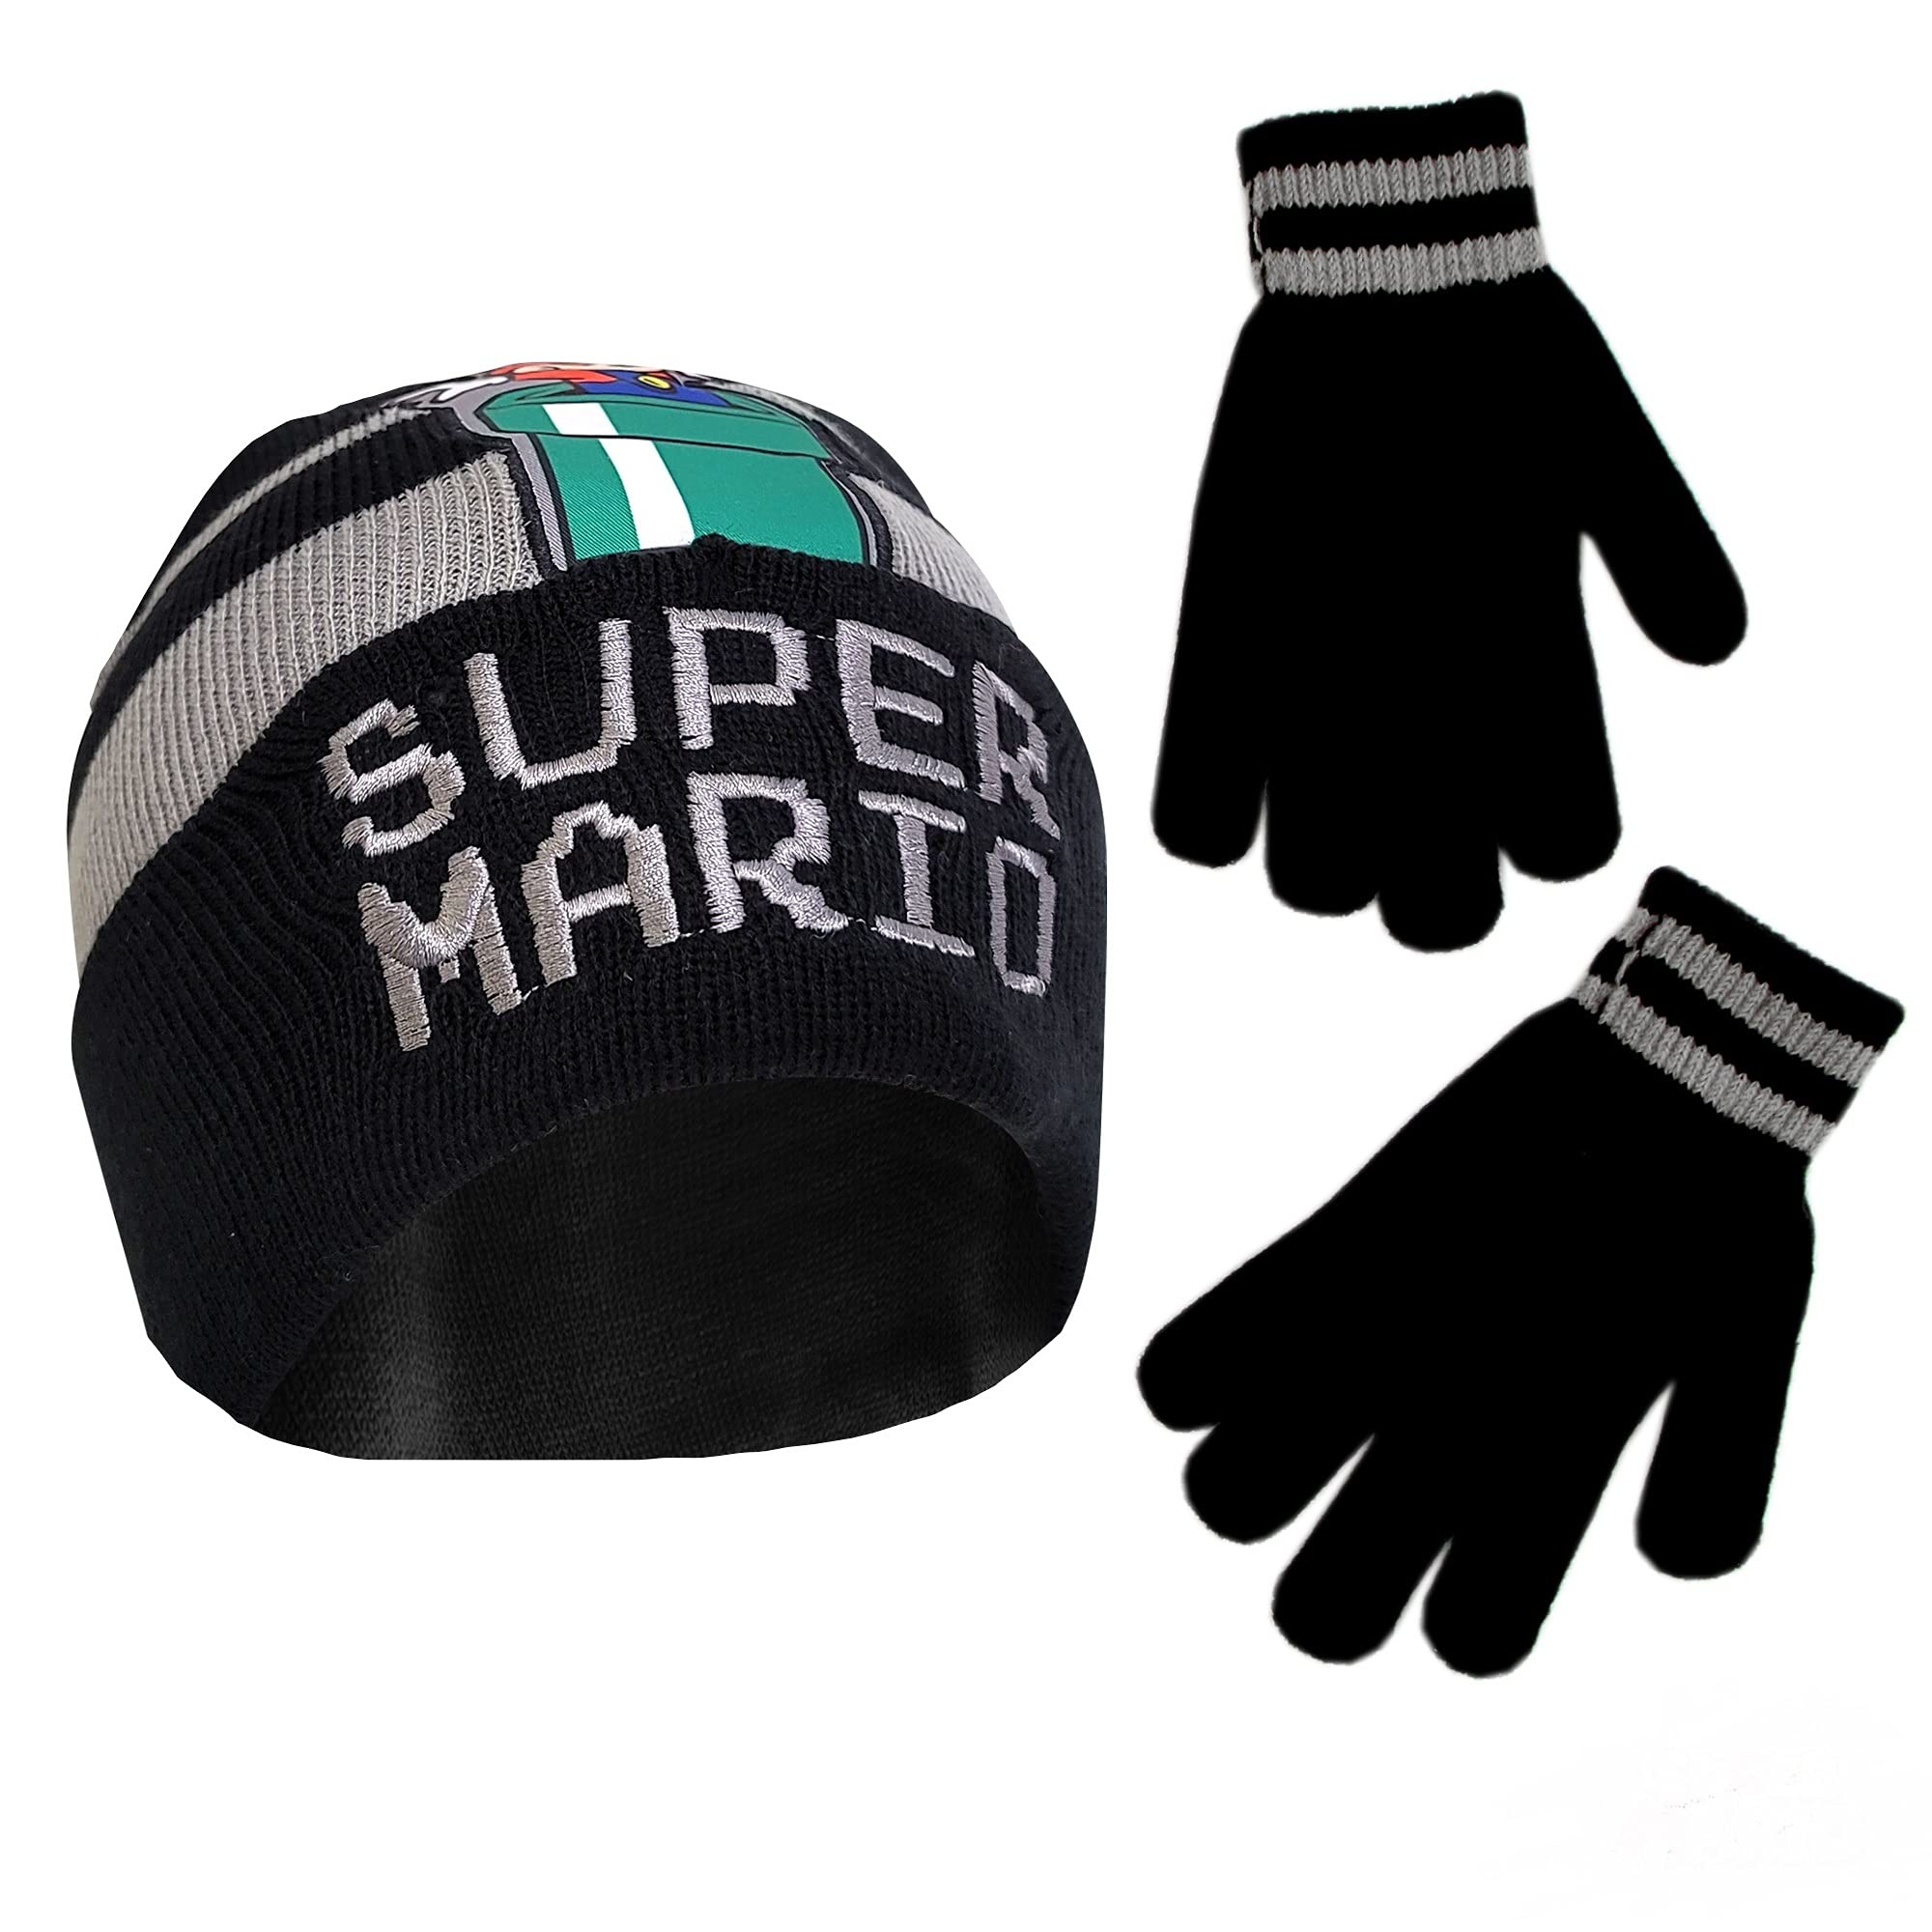 Nintendo Boys' Winter Hat and Kids Gloves Set, Super Mario Beanie for Ages 4-7